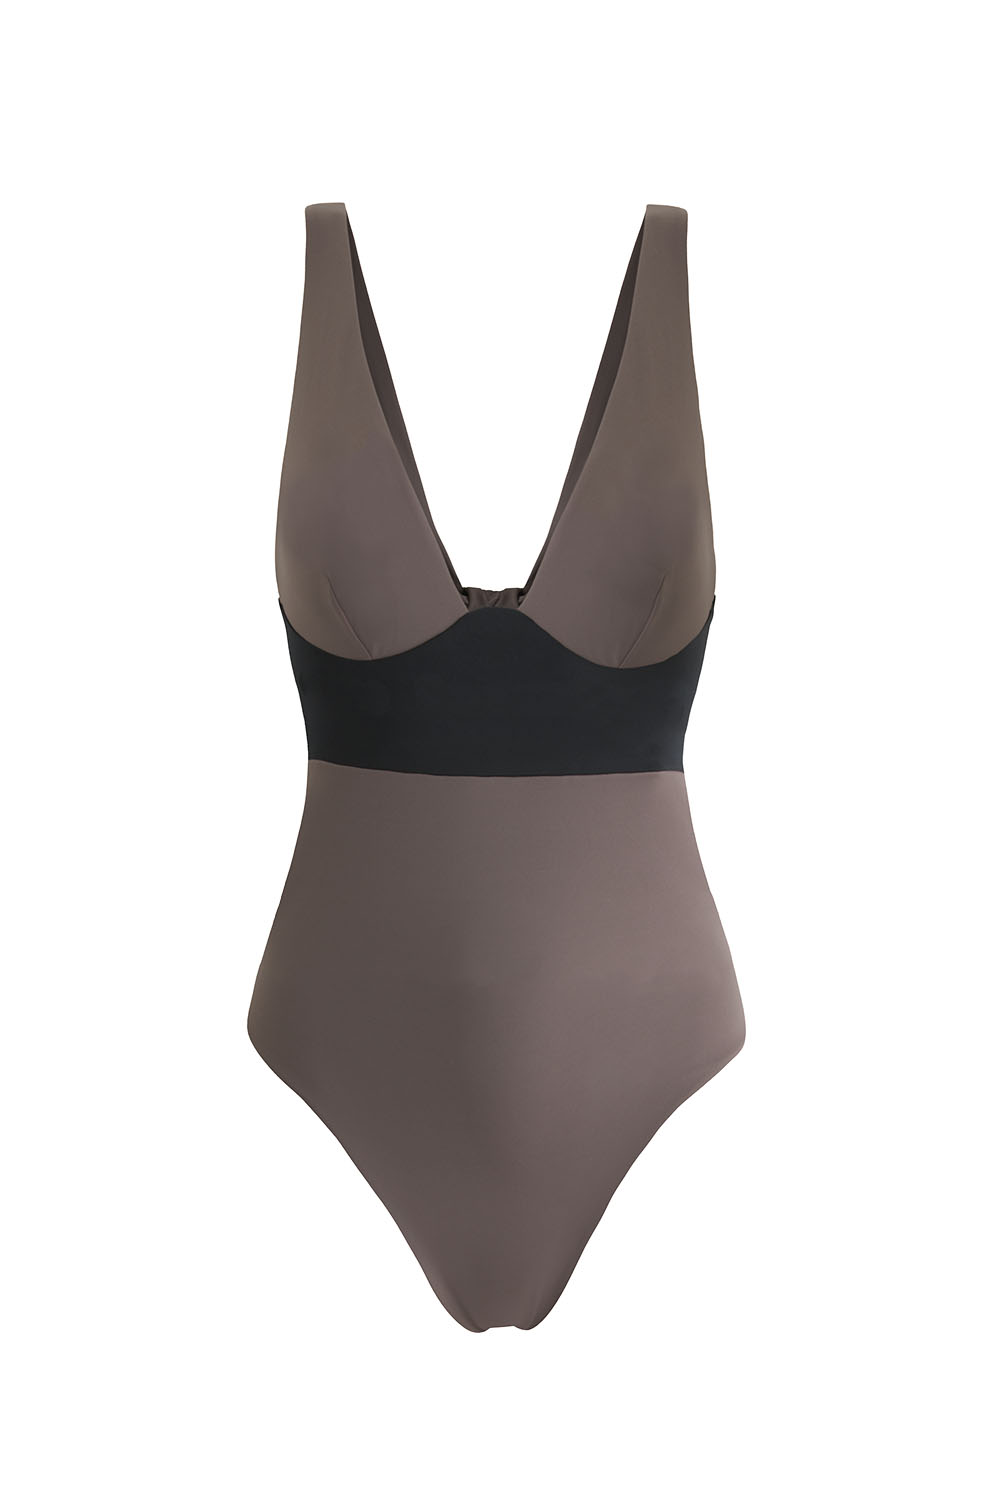 Sustainable Luxury Swimwear / Ropa de baño sostenible, eco swimsuit / bañador ecológico. Pacífico onepiece in taupe by NOW_THEN